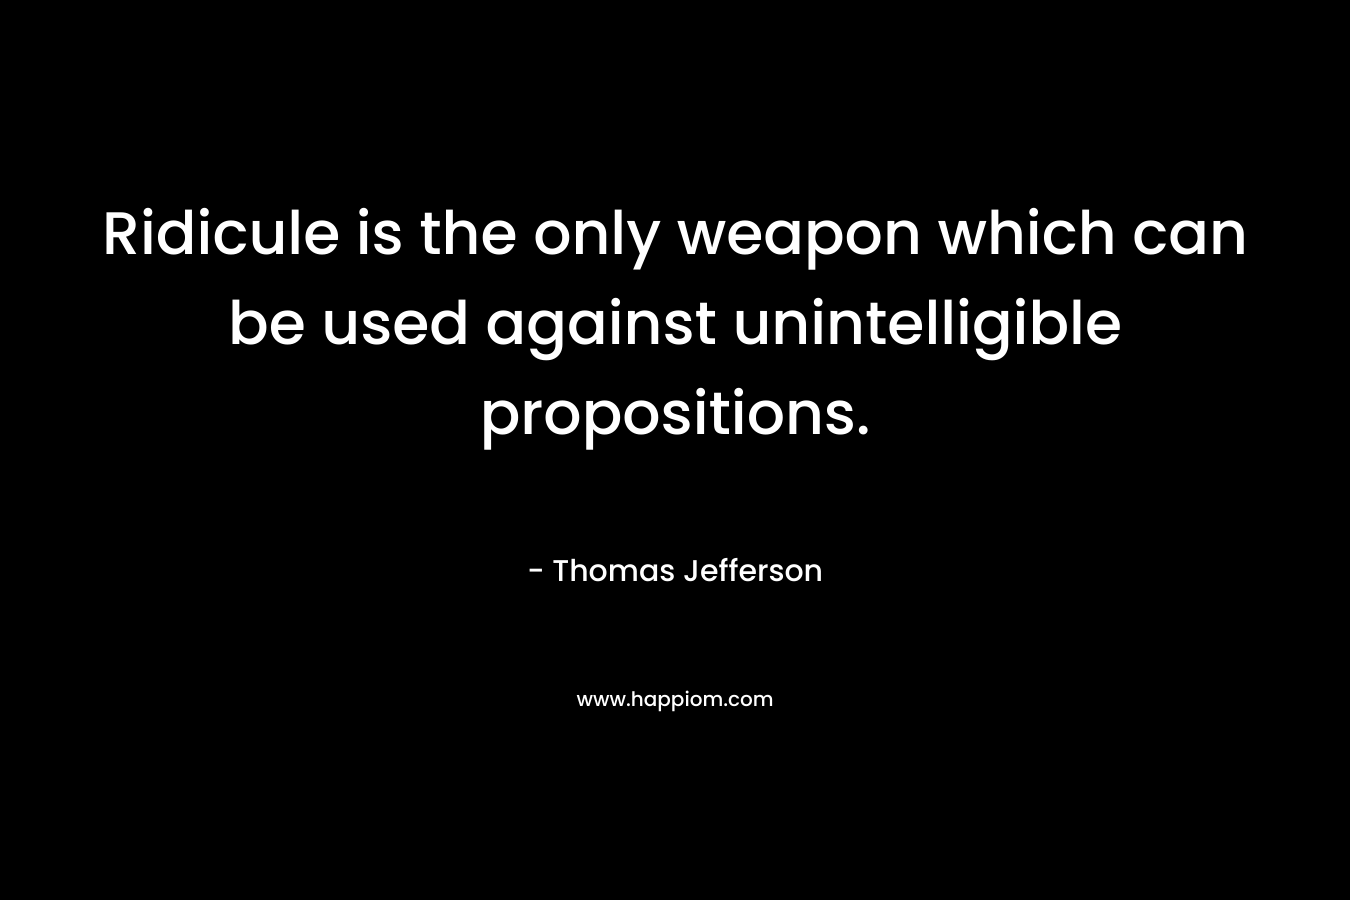 Ridicule is the only weapon which can be used against unintelligible propositions. – Thomas Jefferson